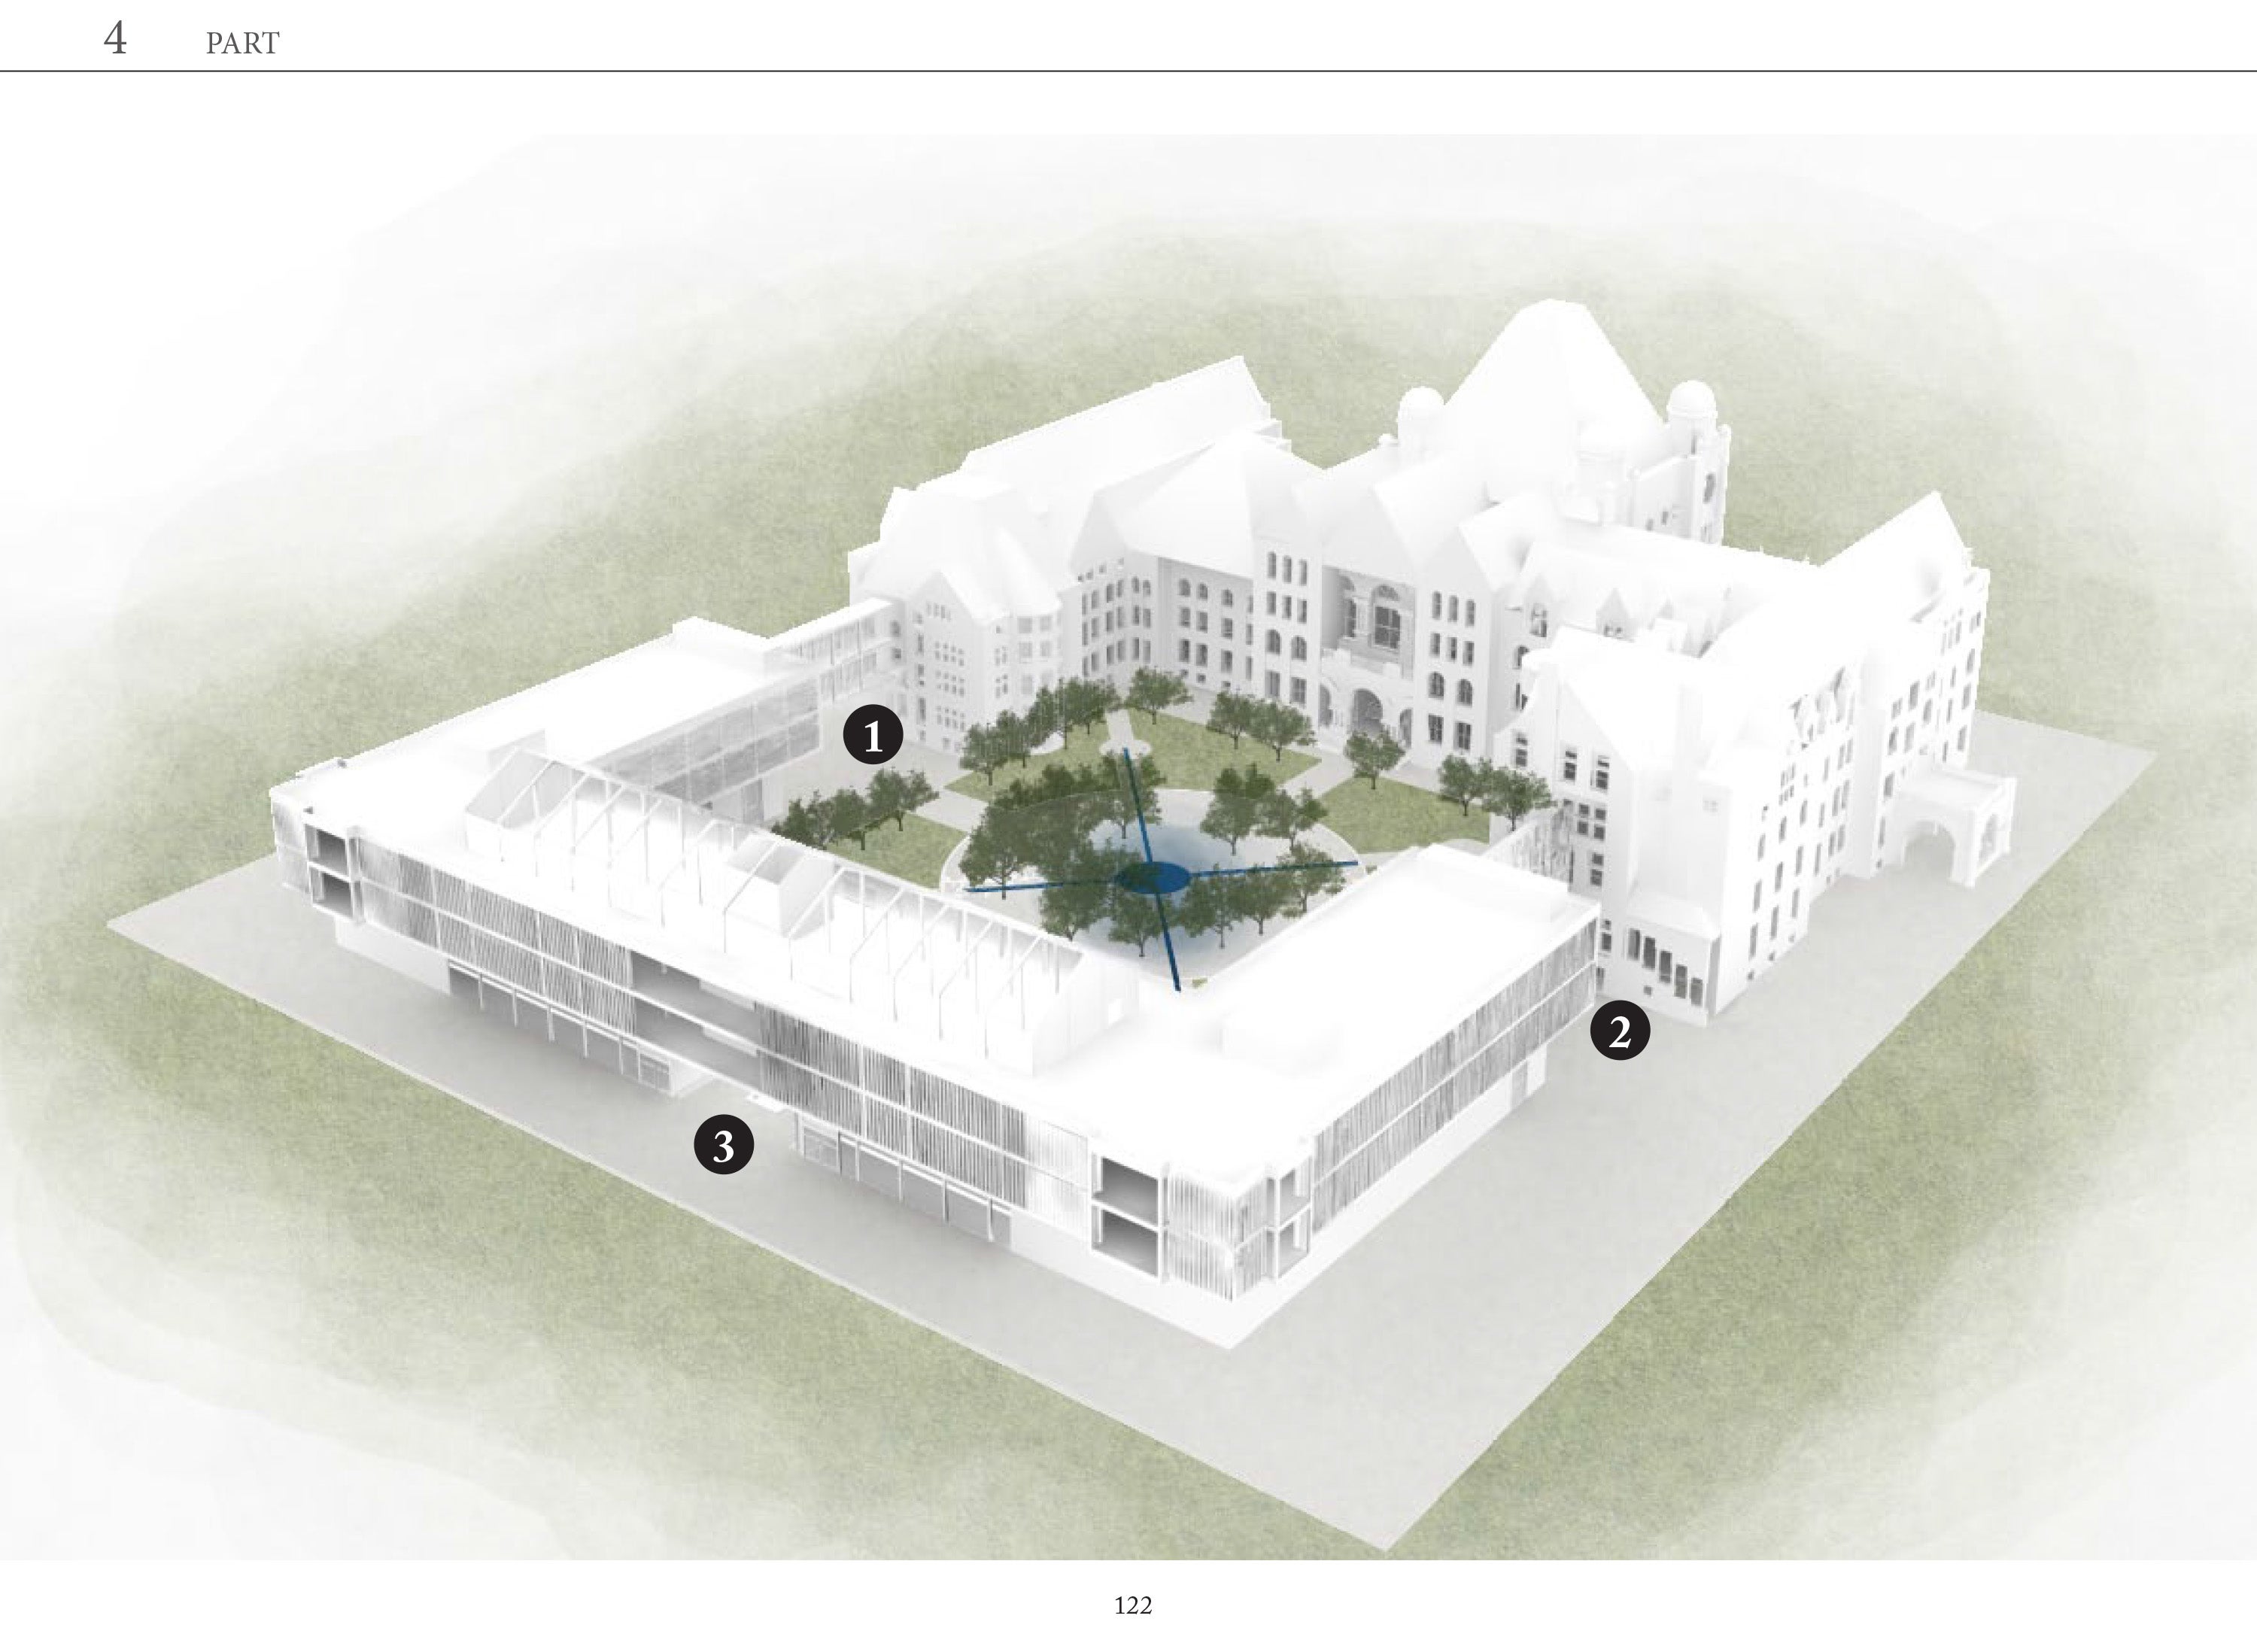 A aerial perspective rendering of a modern building addition infront of an older, larger palace.